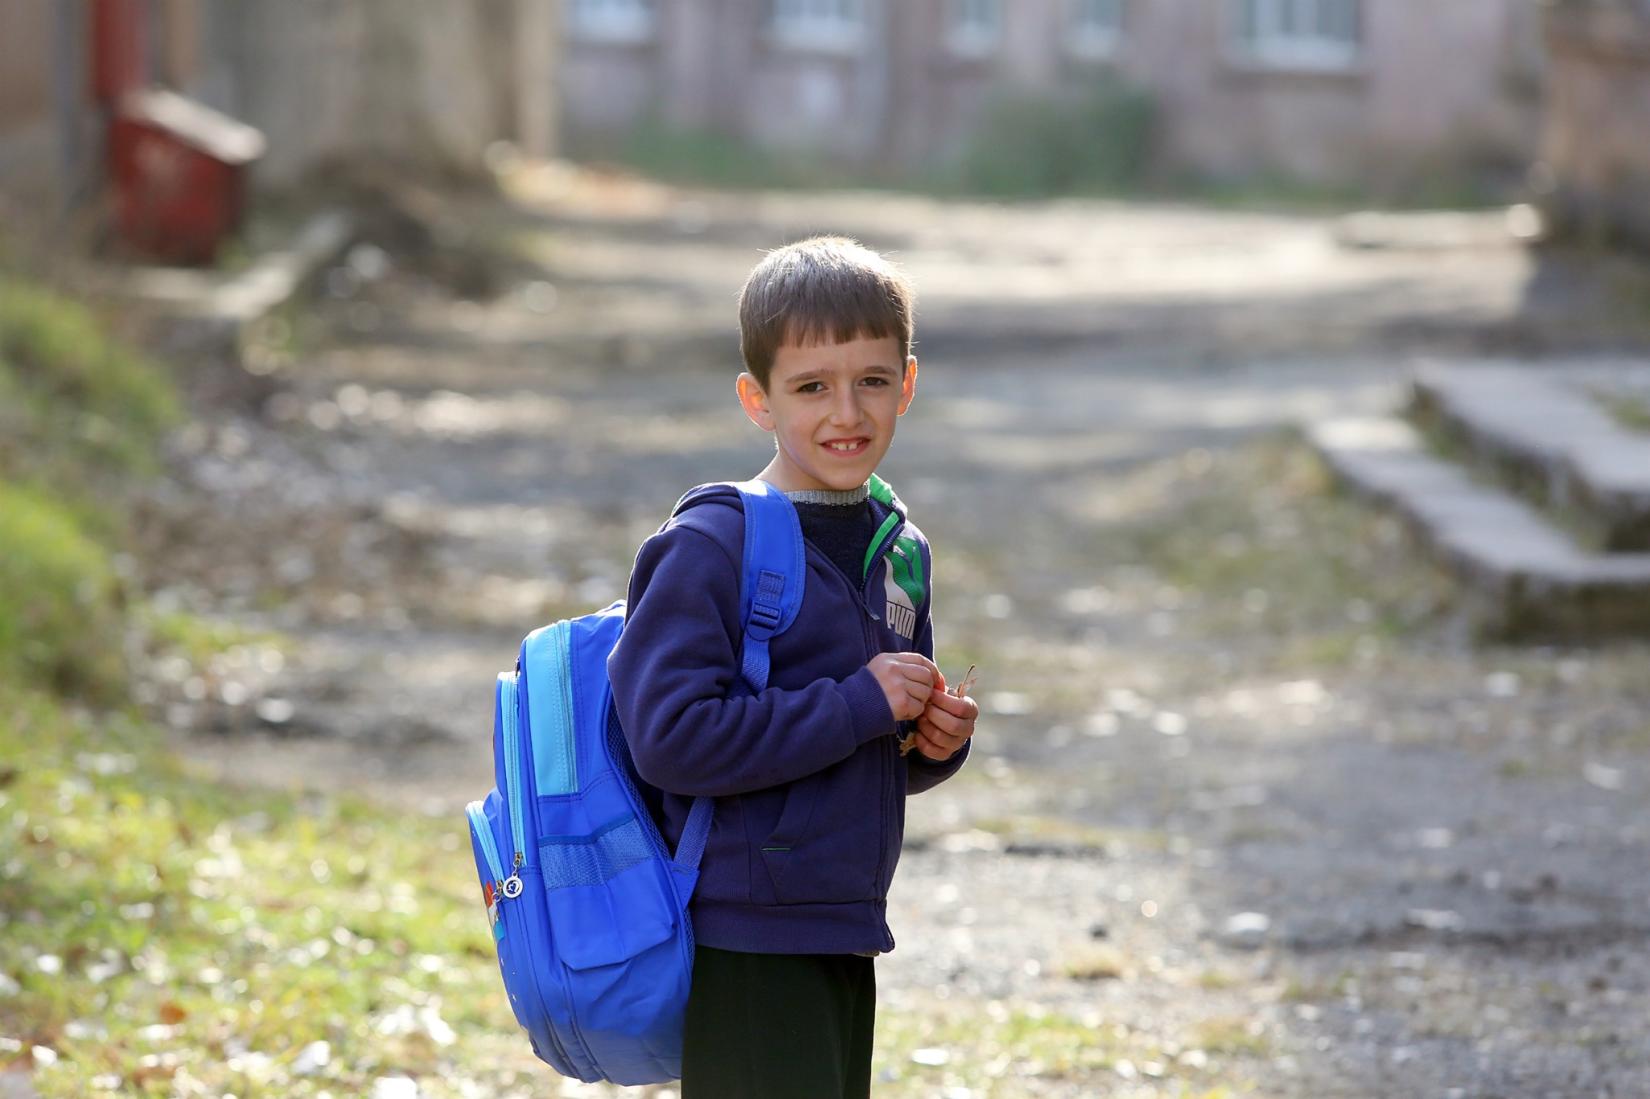 Boy with education kit provided by UNICEF.